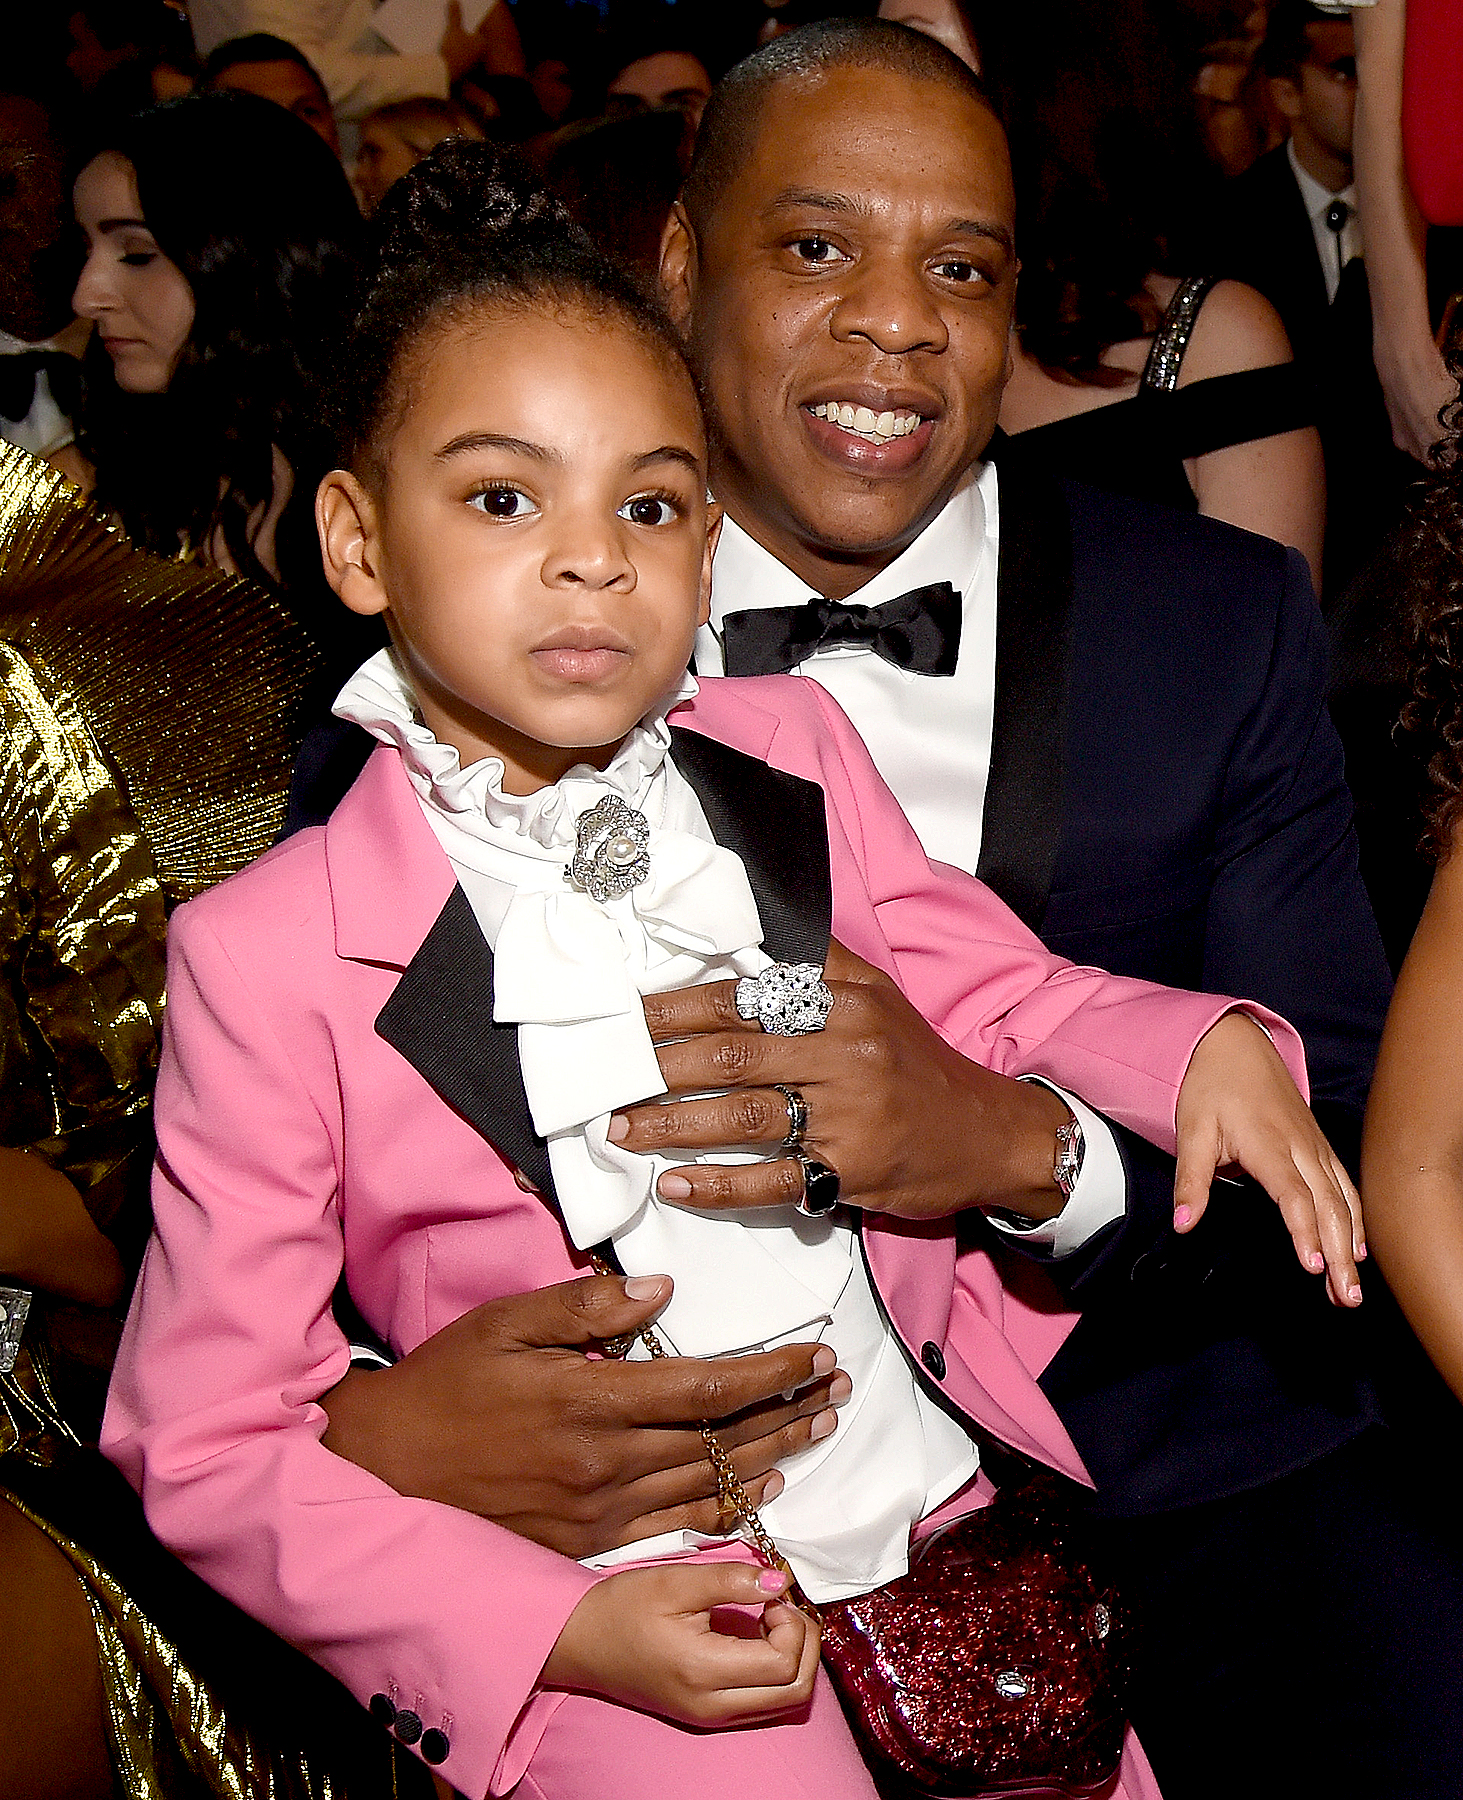 What Is the Meaning Behind Blue Ivy Carter's Name?